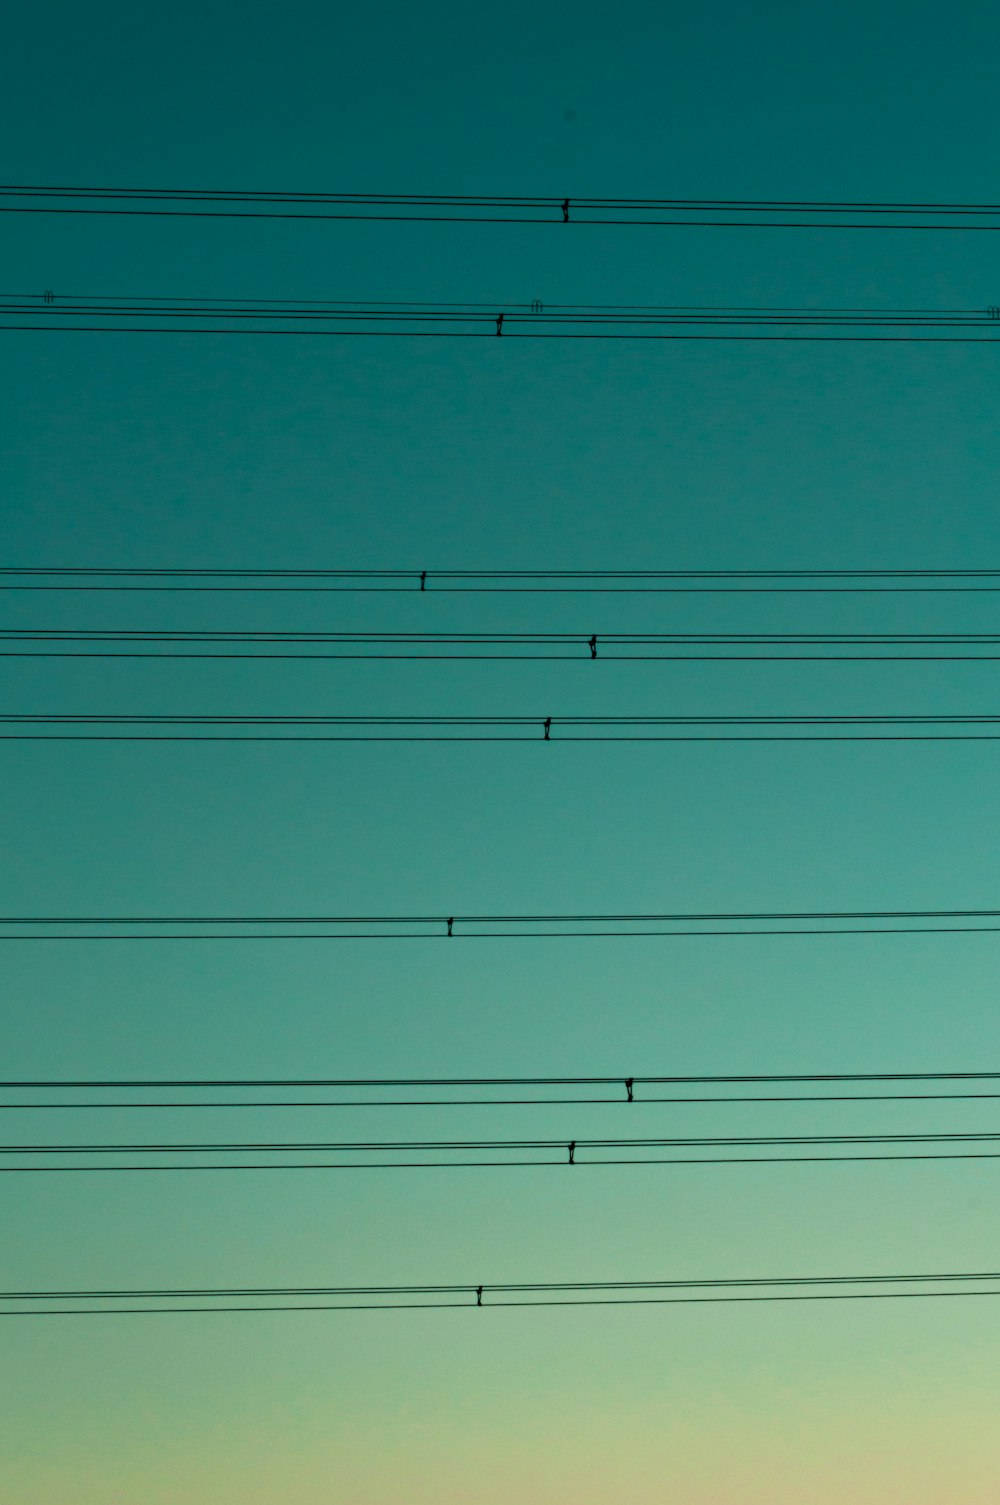 black electric wires under blue sky during daytime